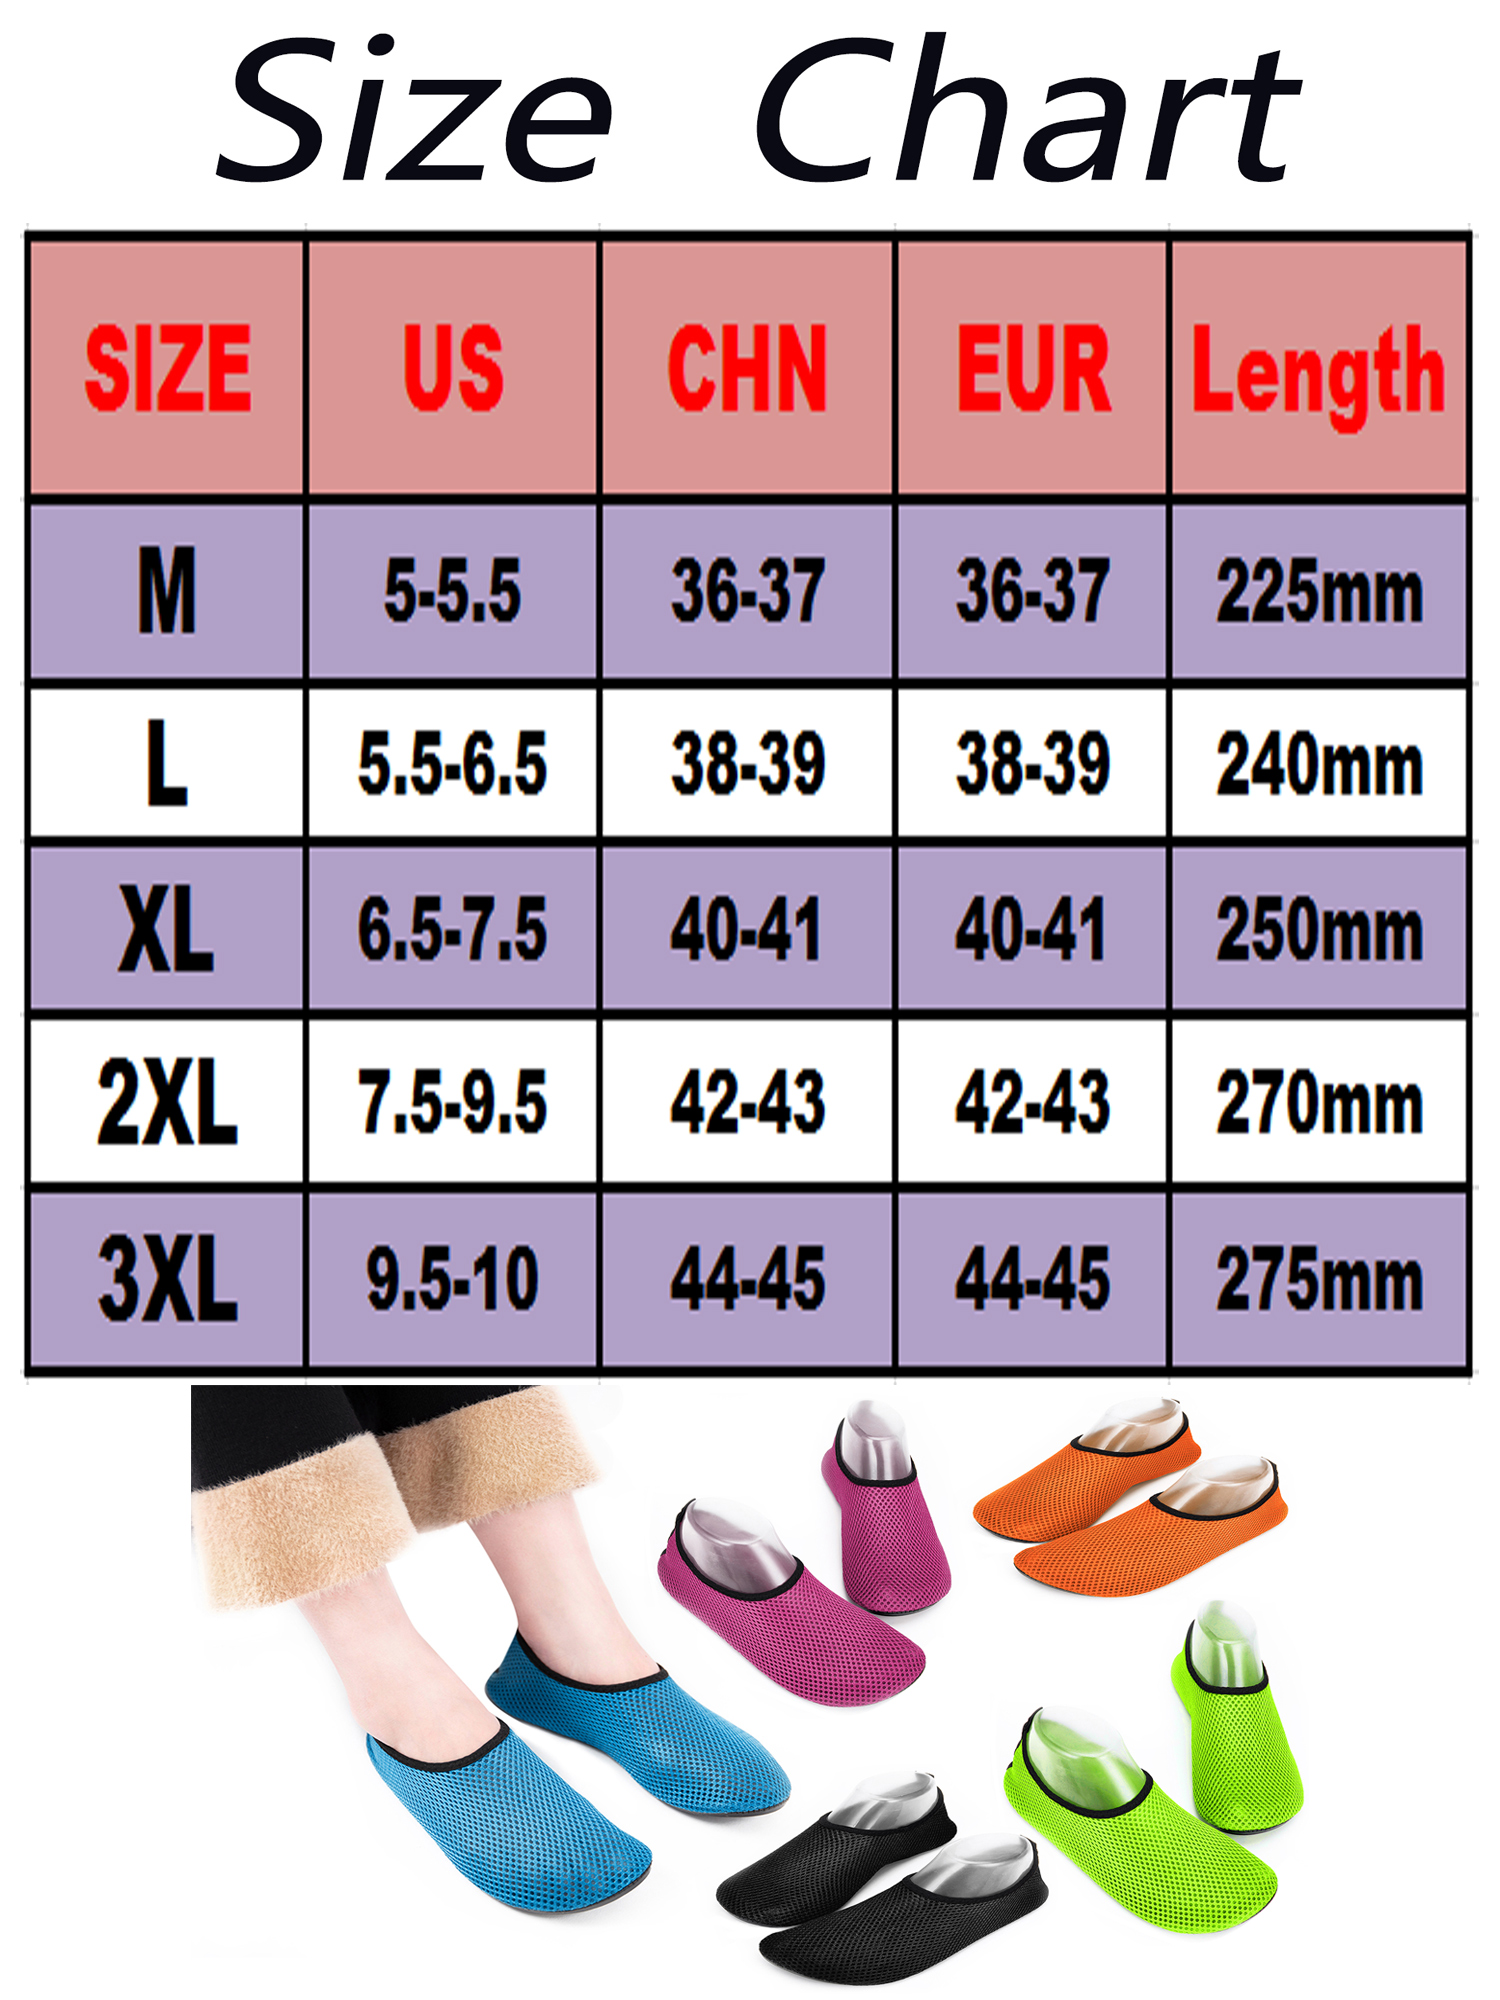 Unisex Water Shoes Barefoot Shoes Quick Dry Aqua Socks for Outdoor Beach Walking, Swiming, Surfing, Snorkeling,Yoga for Teenager and Adult - image 2 of 8